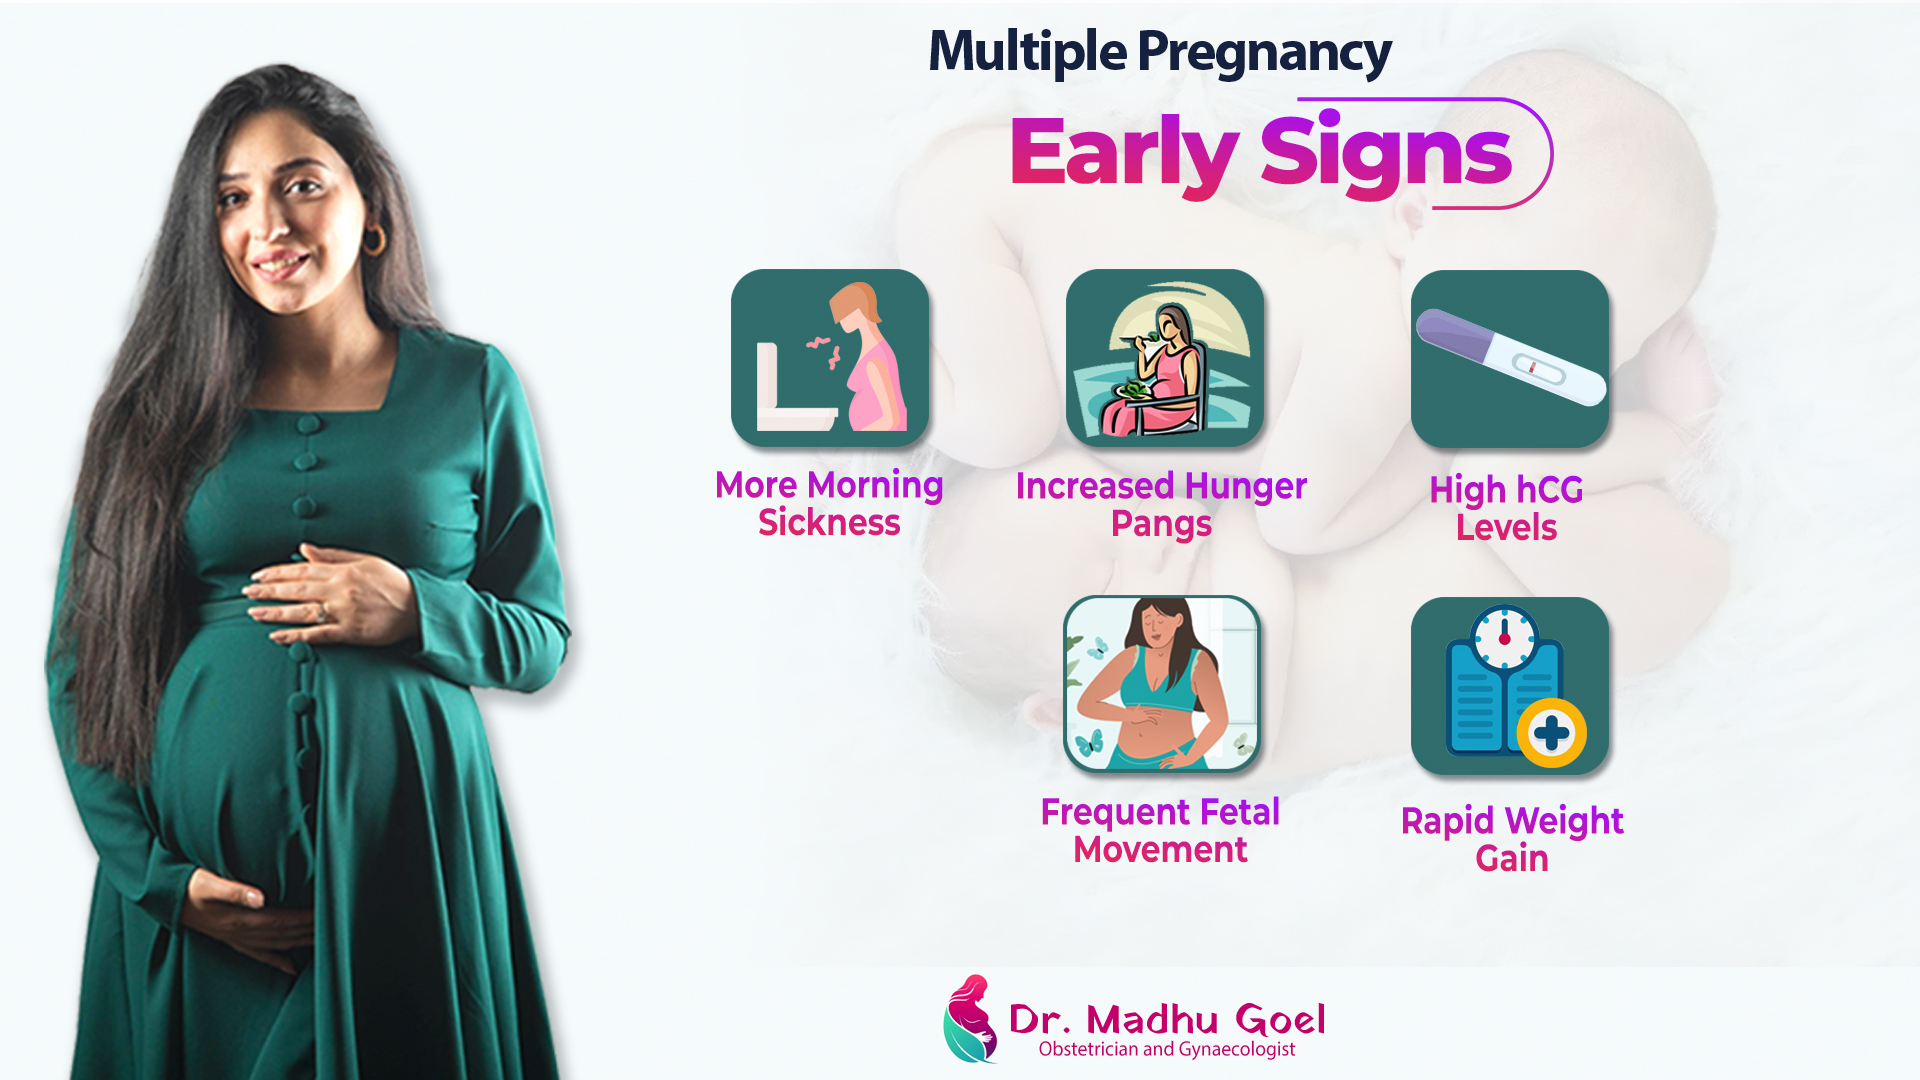 Early Signs Multiple Pregnancy